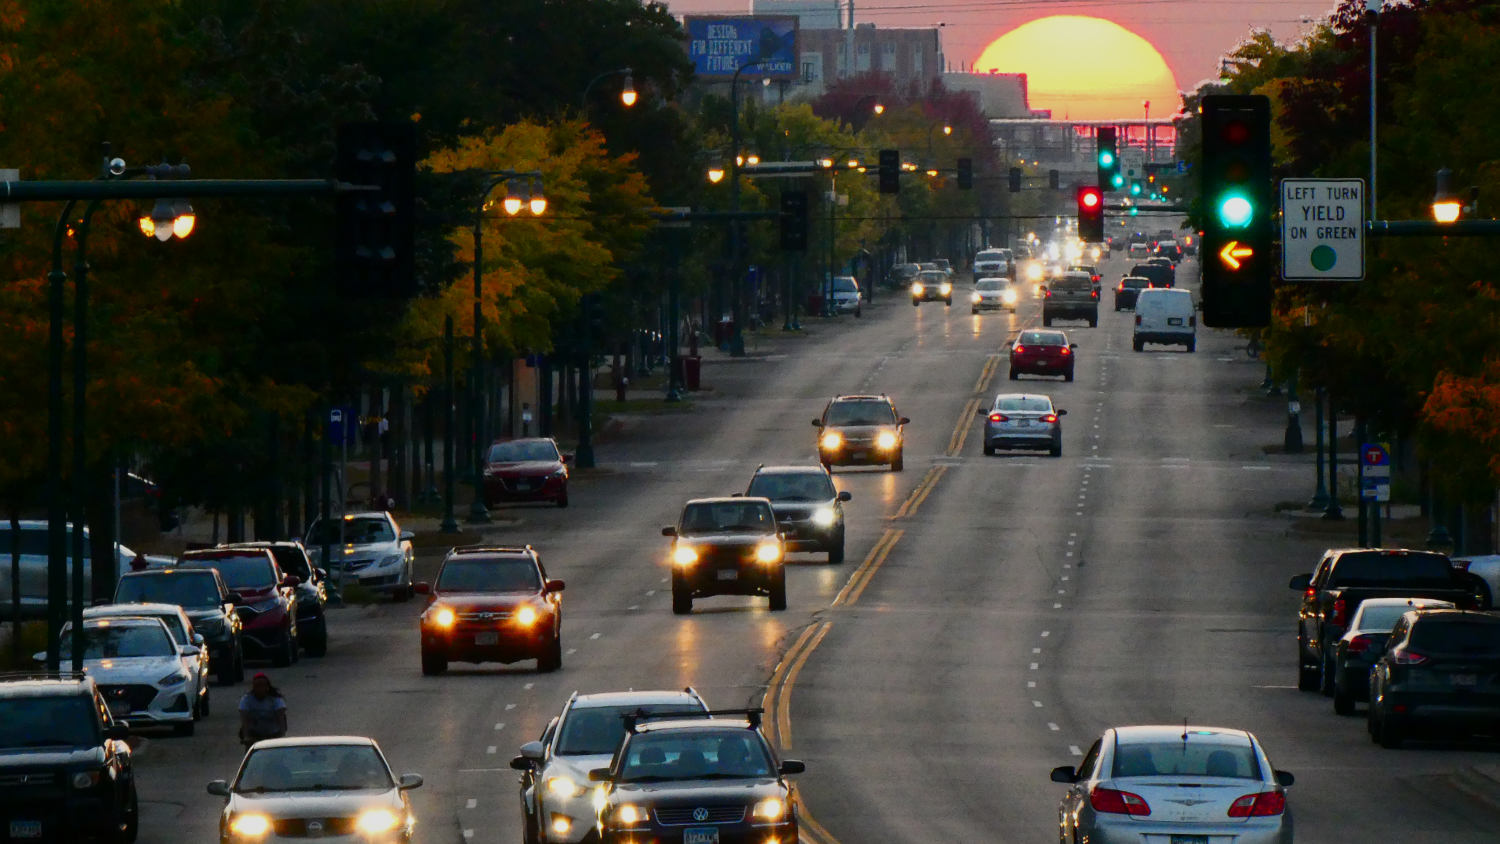 Telescopic view looking down a four-lane street with cars and traffic lights, most green, one red, one yellow arrow, with a giant sunset in the background setting over the street scene